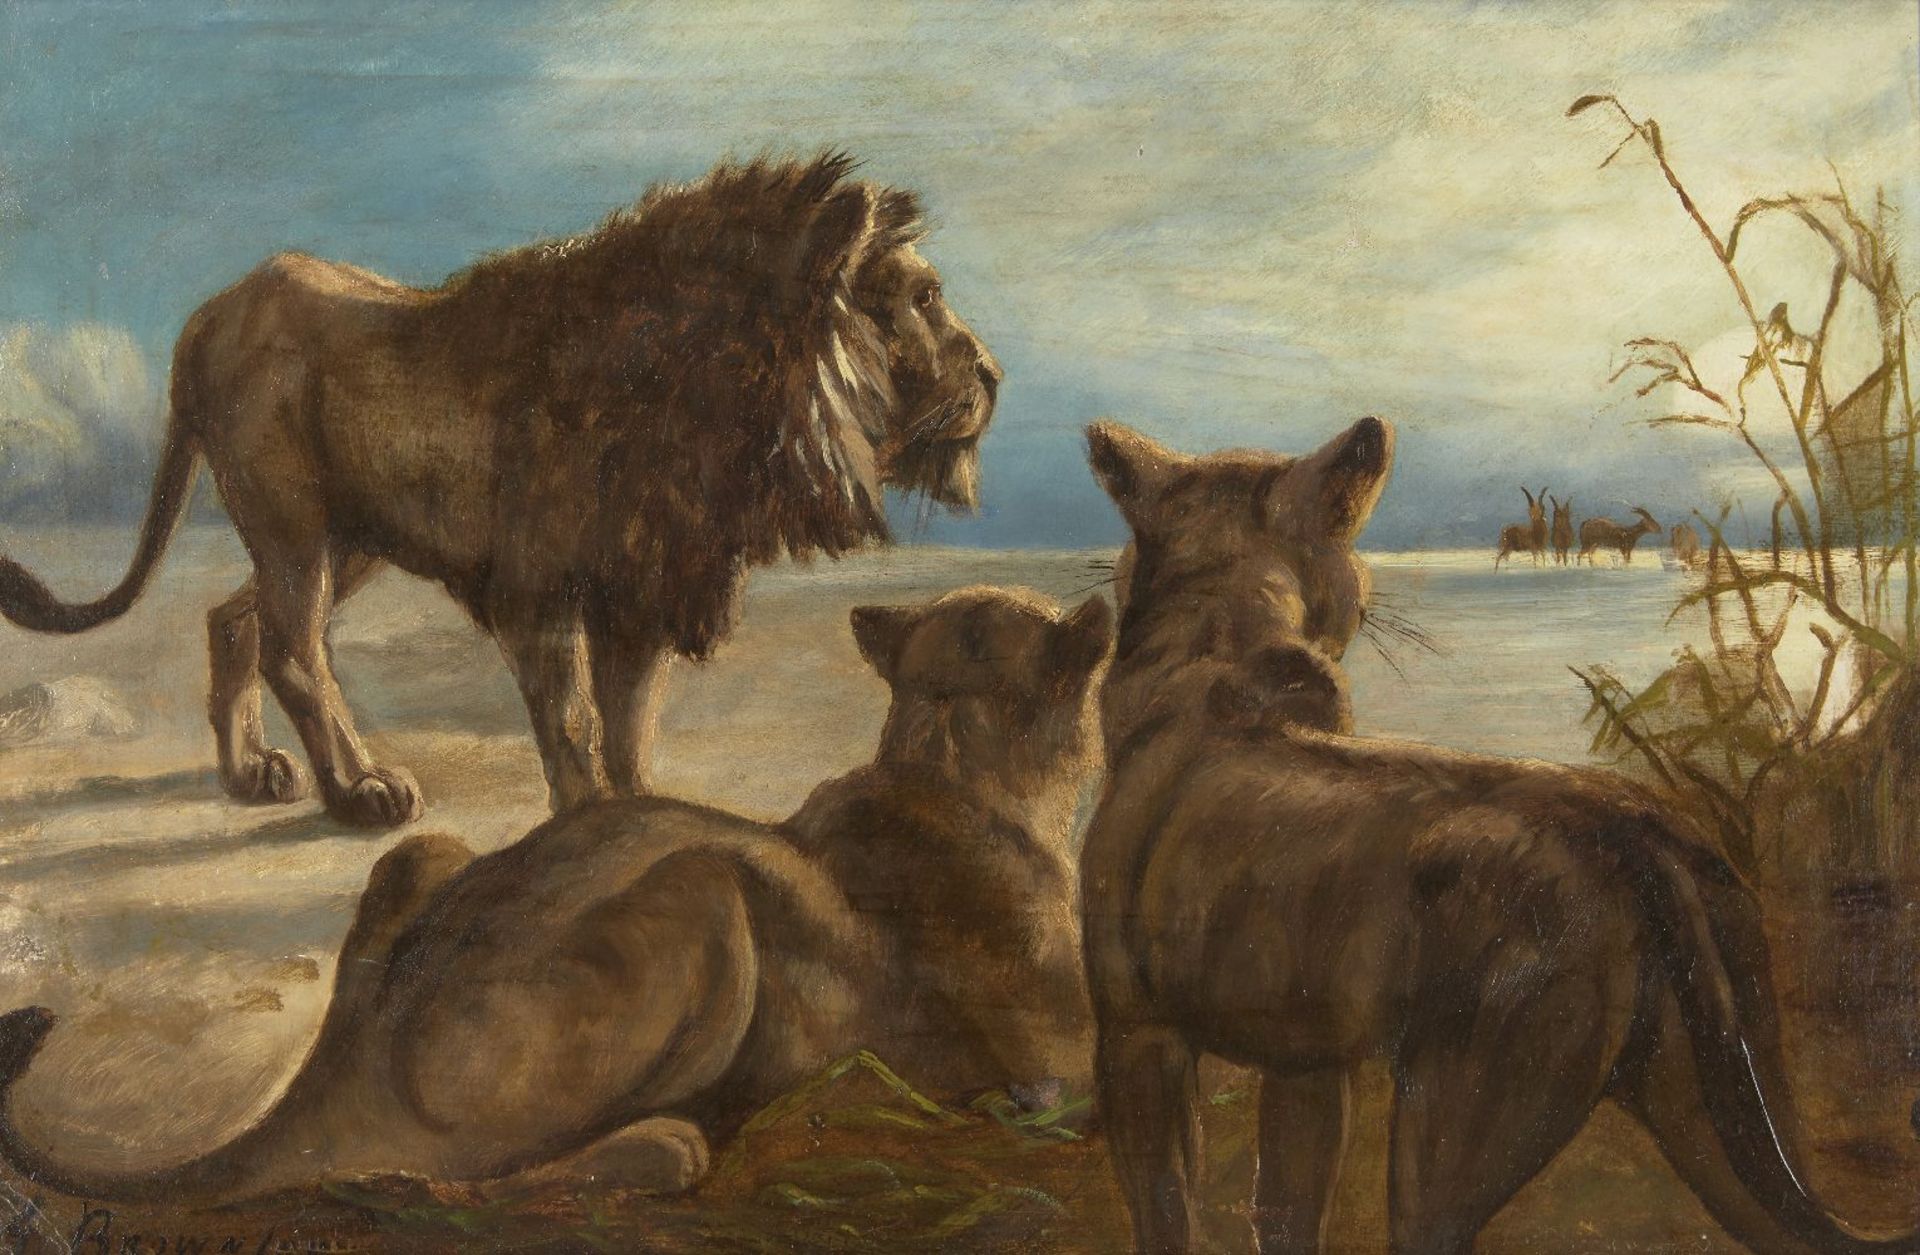 G Brownlaw, British, late 19th/early 20th century- Family of lions near a herd of gazelle; oil on